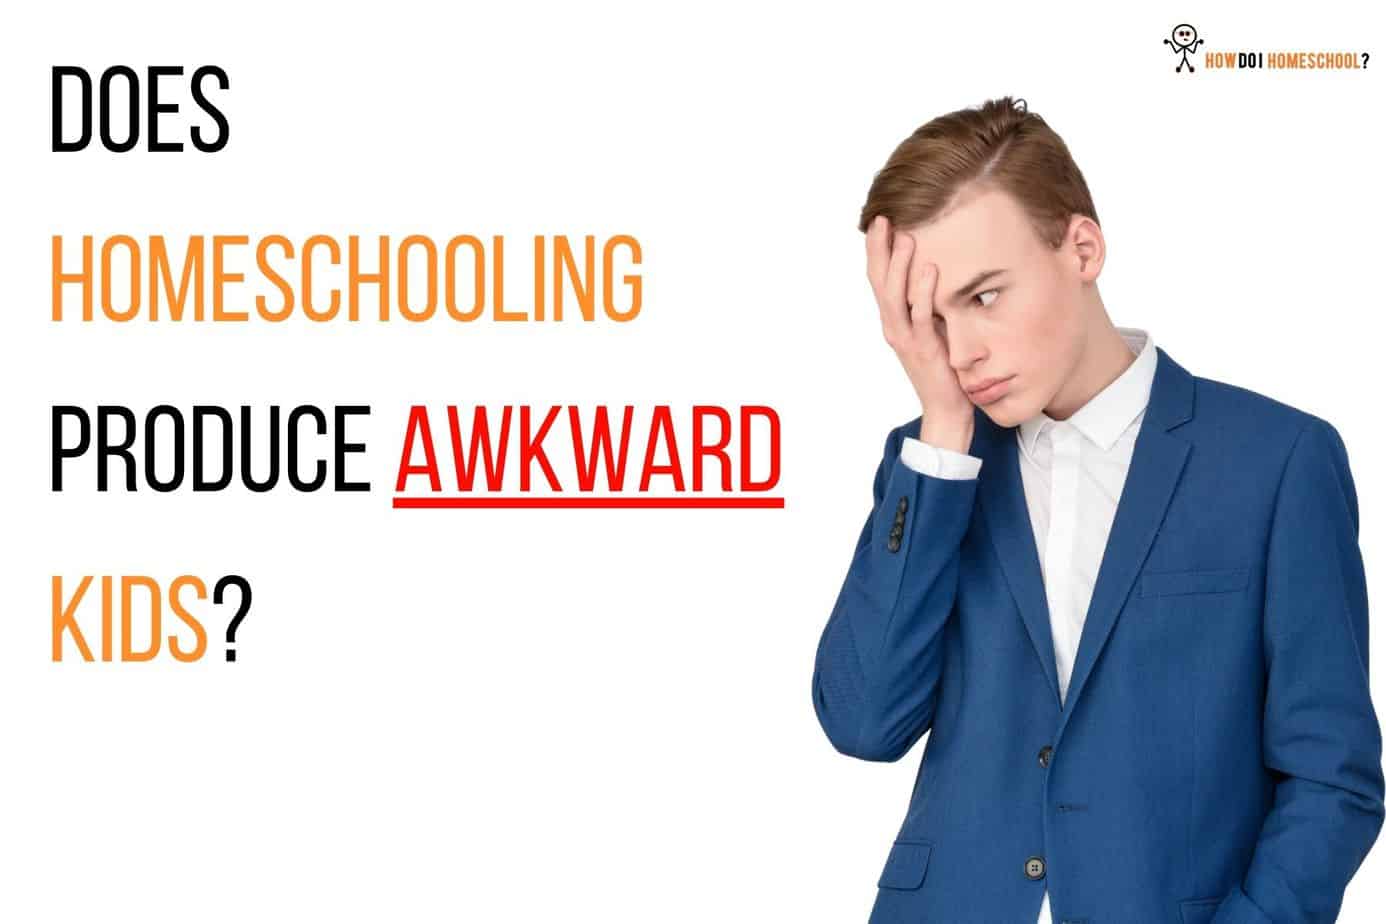 Why are homeschoolers socially awkward? Or perhaps we should be asking are homeschoolers socially awkward? Whichever way you cut it, they are different from schoolchildren and do things differently. Is this bad? Let's have a look. #homeschoolersawkward